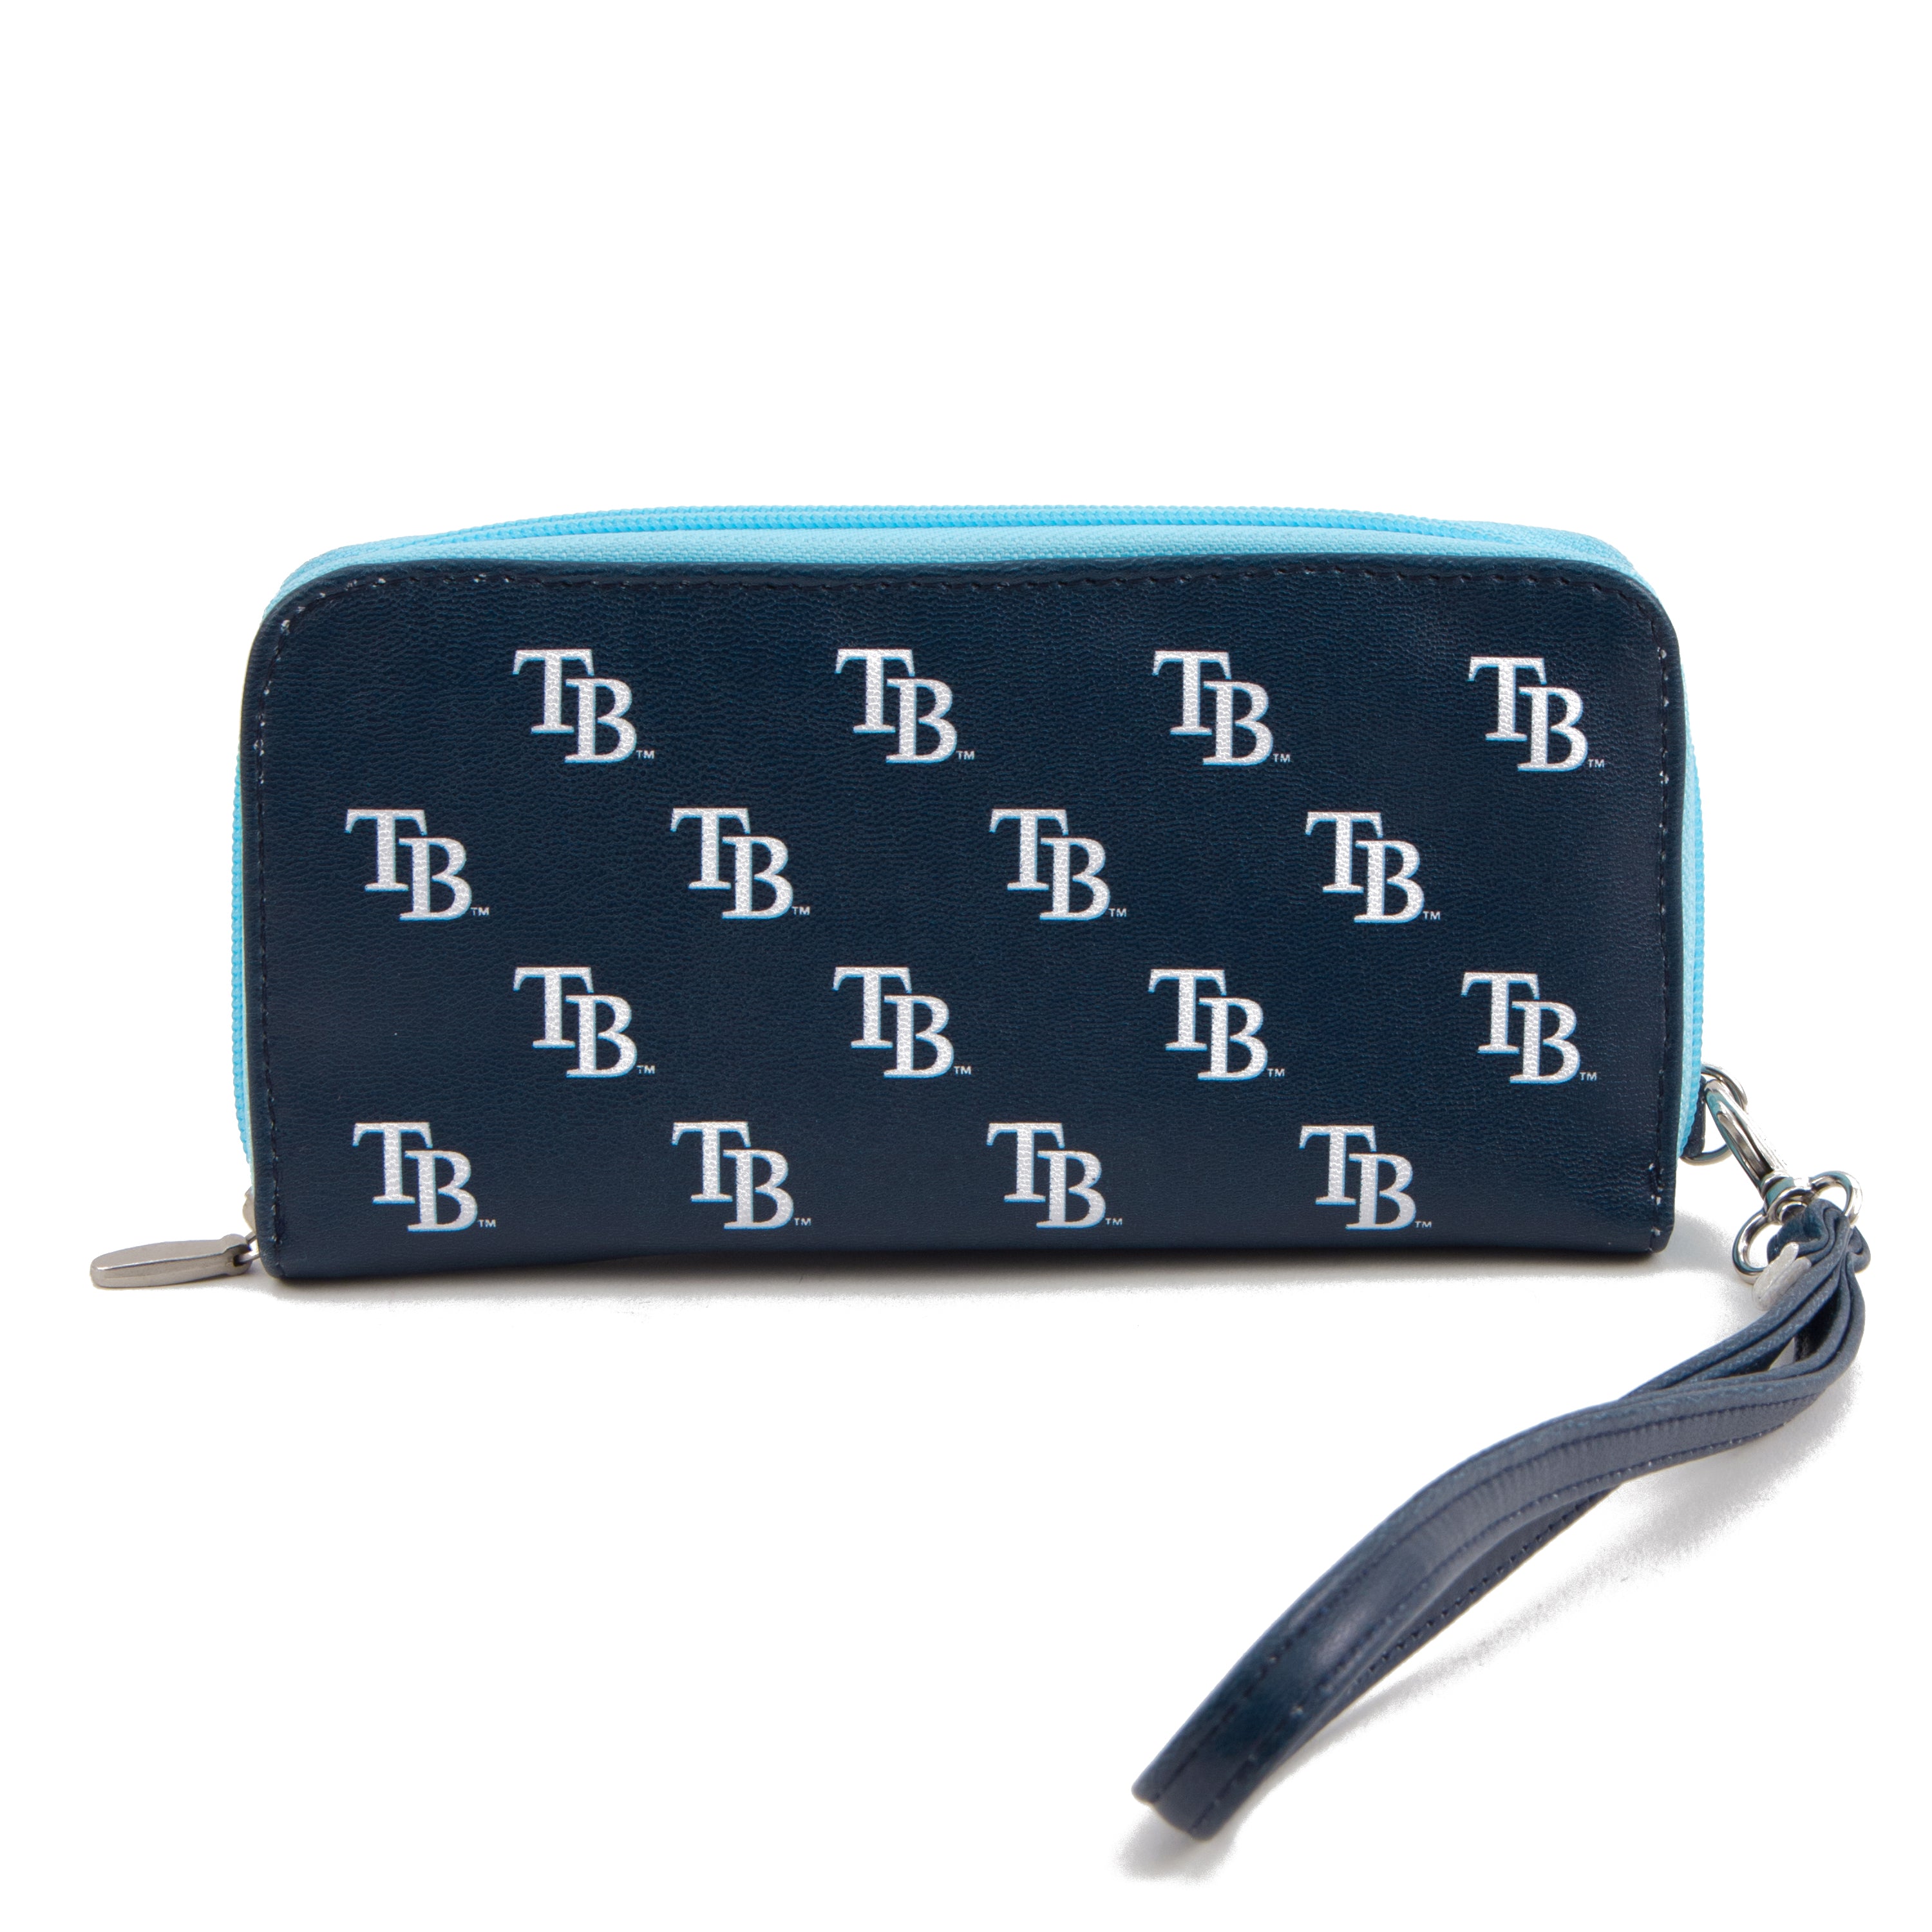 Tampa Bay Rays Wristlet Wallet – Eagles Wings